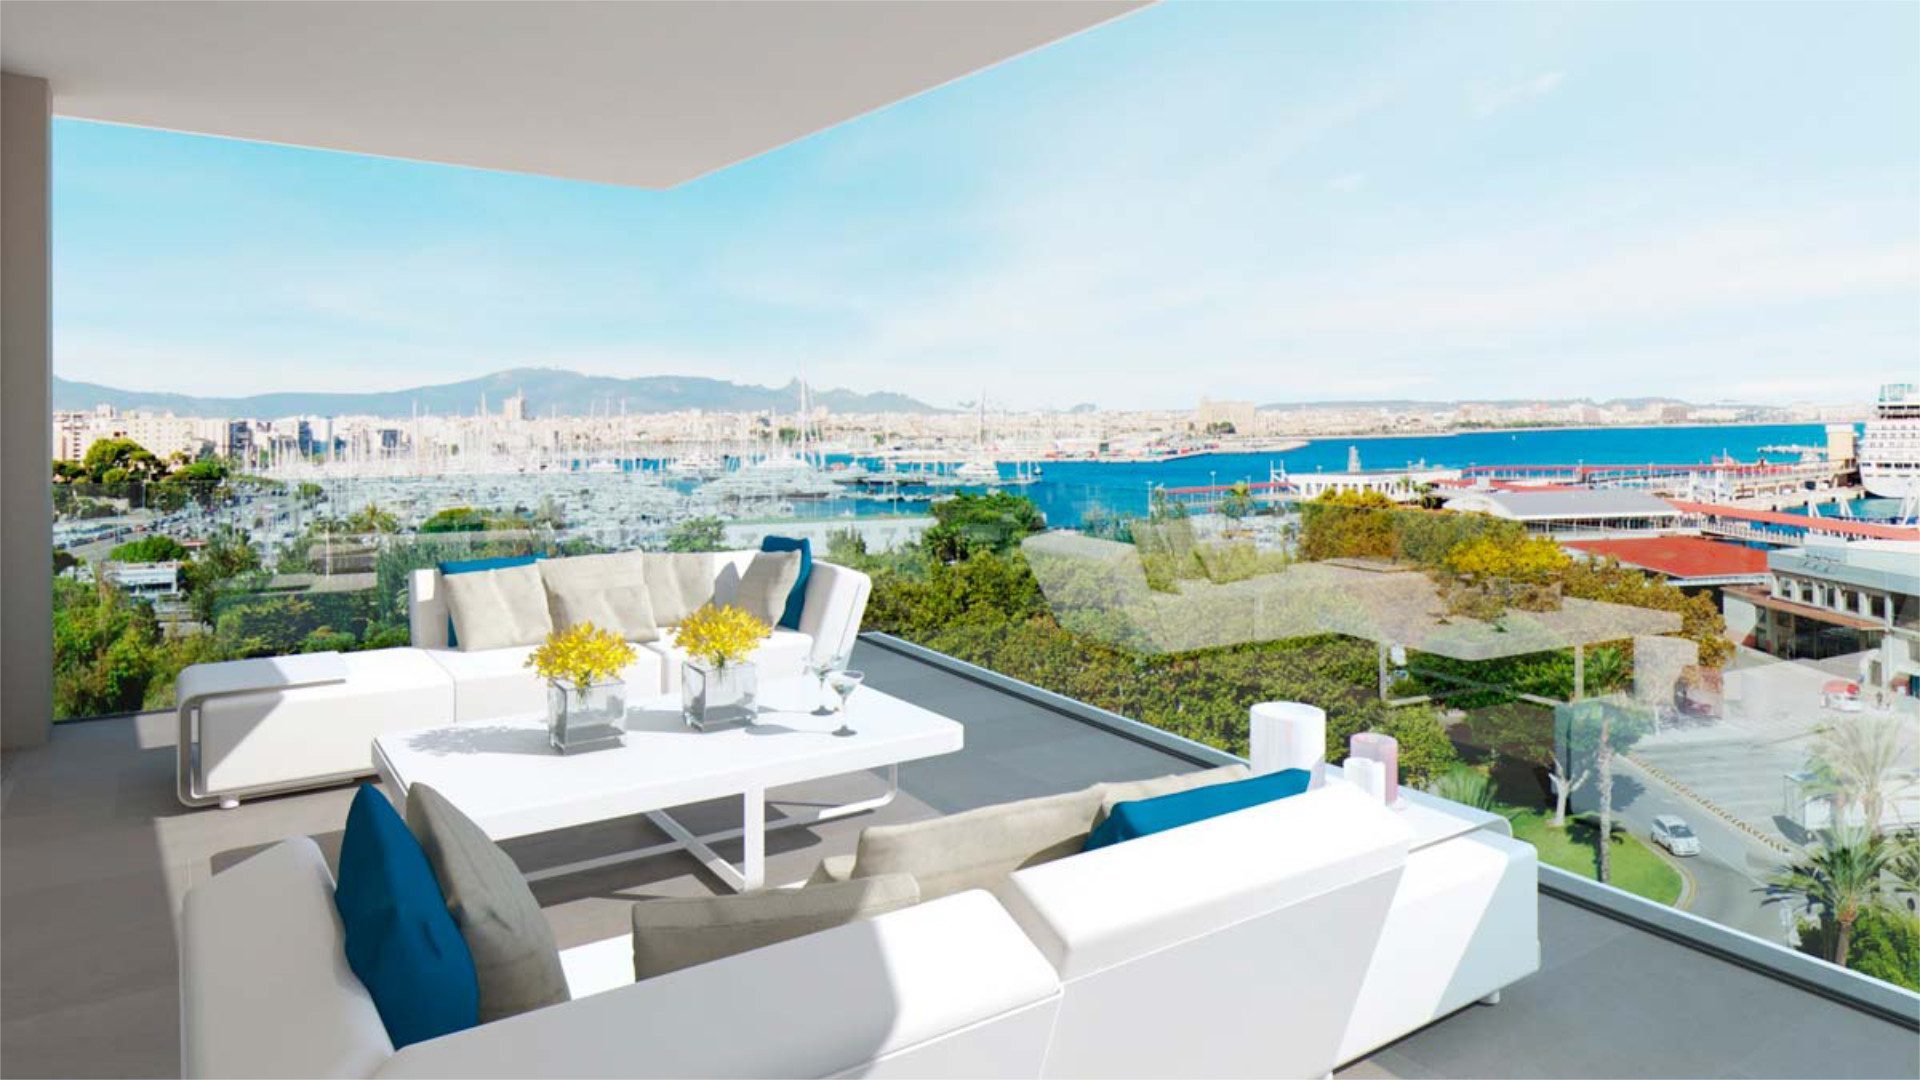 Exclusive luxury apartment with view of the harbor of Palma, Mallorca